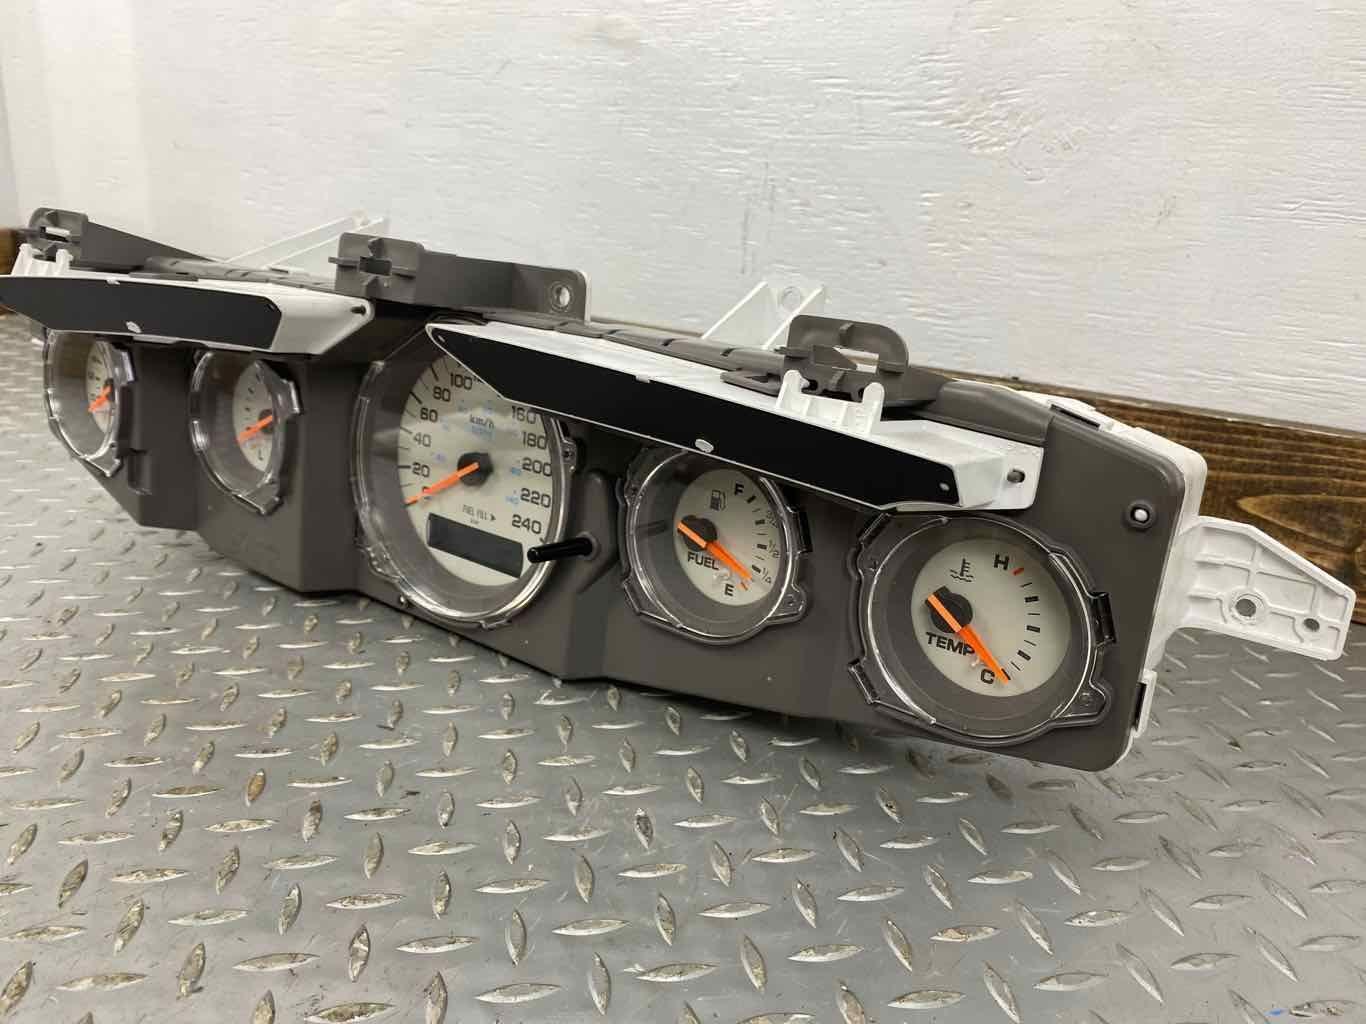 97-02 Plymouth Chrysler Prowler Canadian KPH OEM Speedometer Cluster Tested